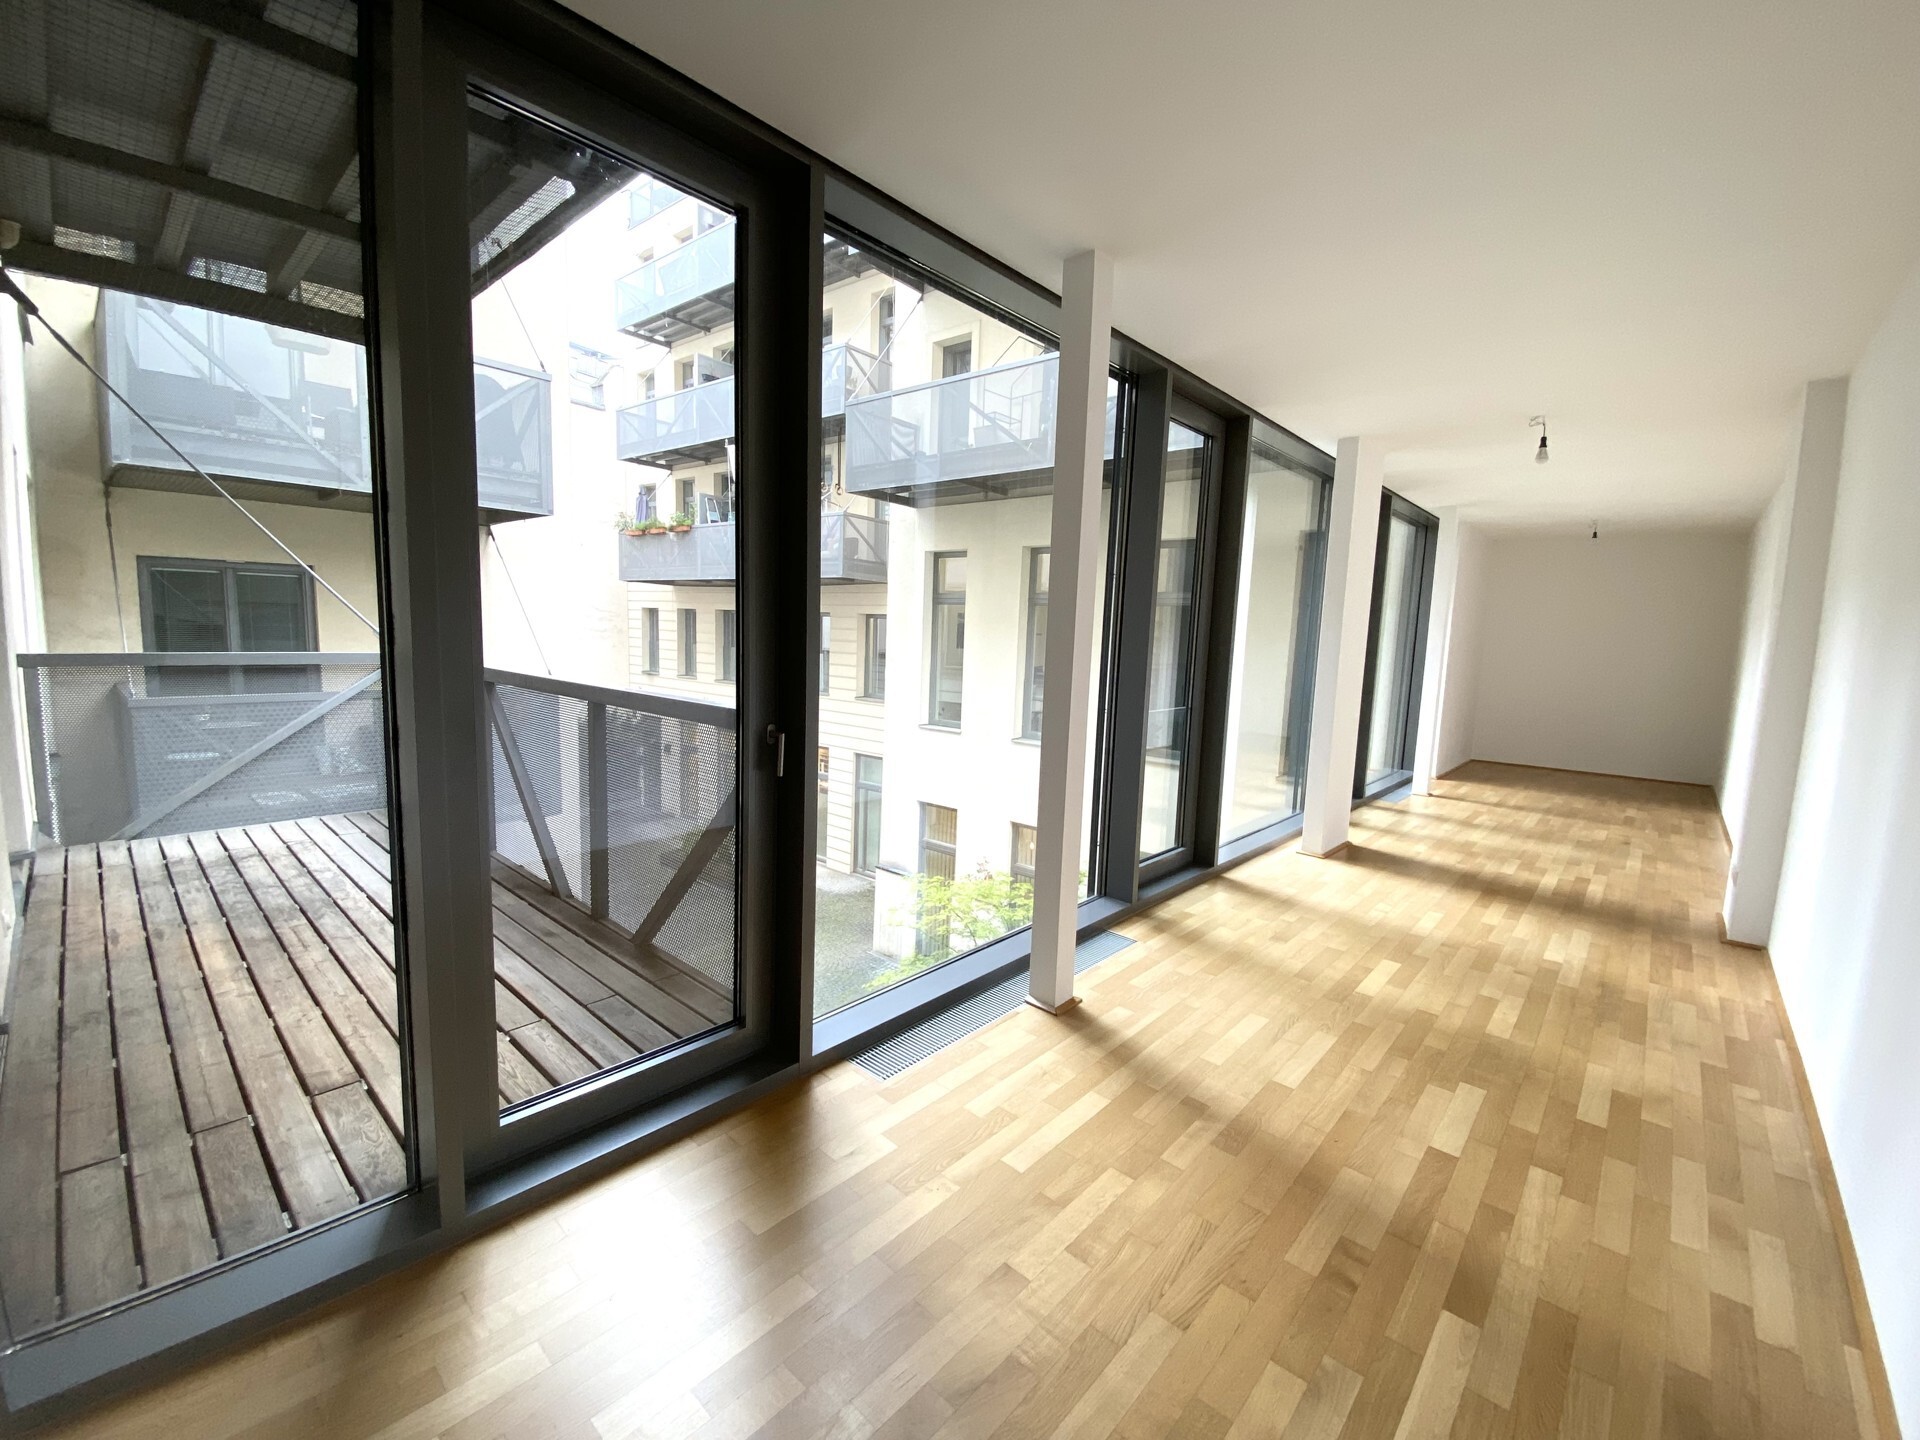 Extremely spacious 2-room apartment with approx. 9 m² balcony in prime location for rent for an indefinite period in 1070 Vienna